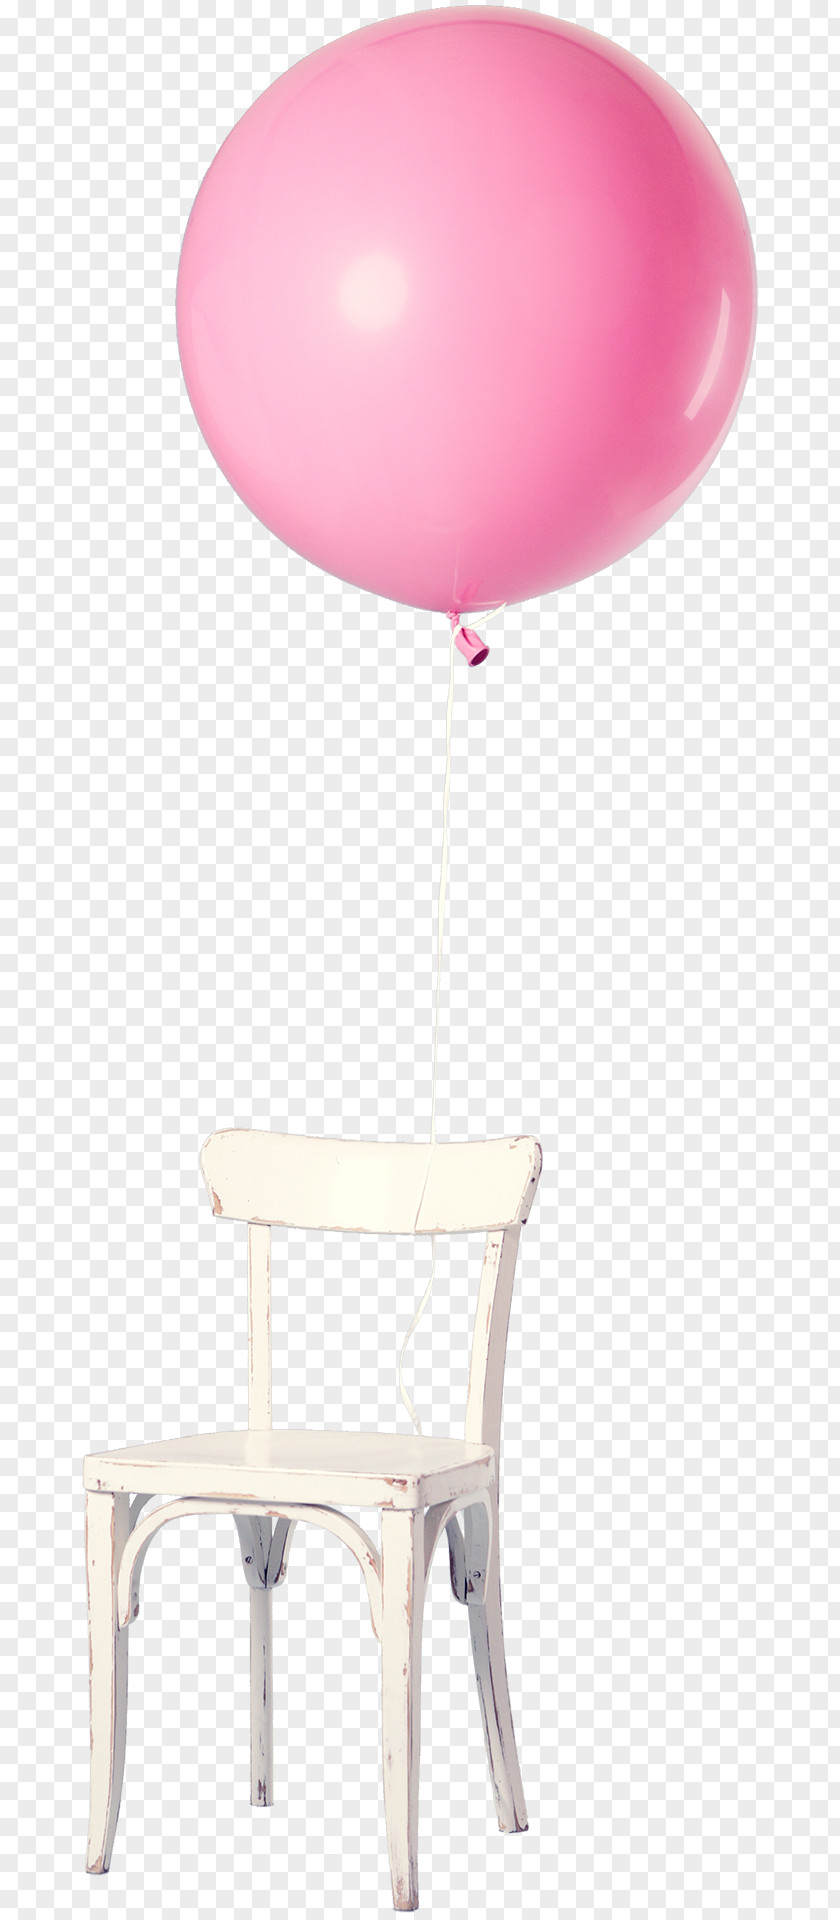 Balloon Toy Hot Air Birthday Party PNG